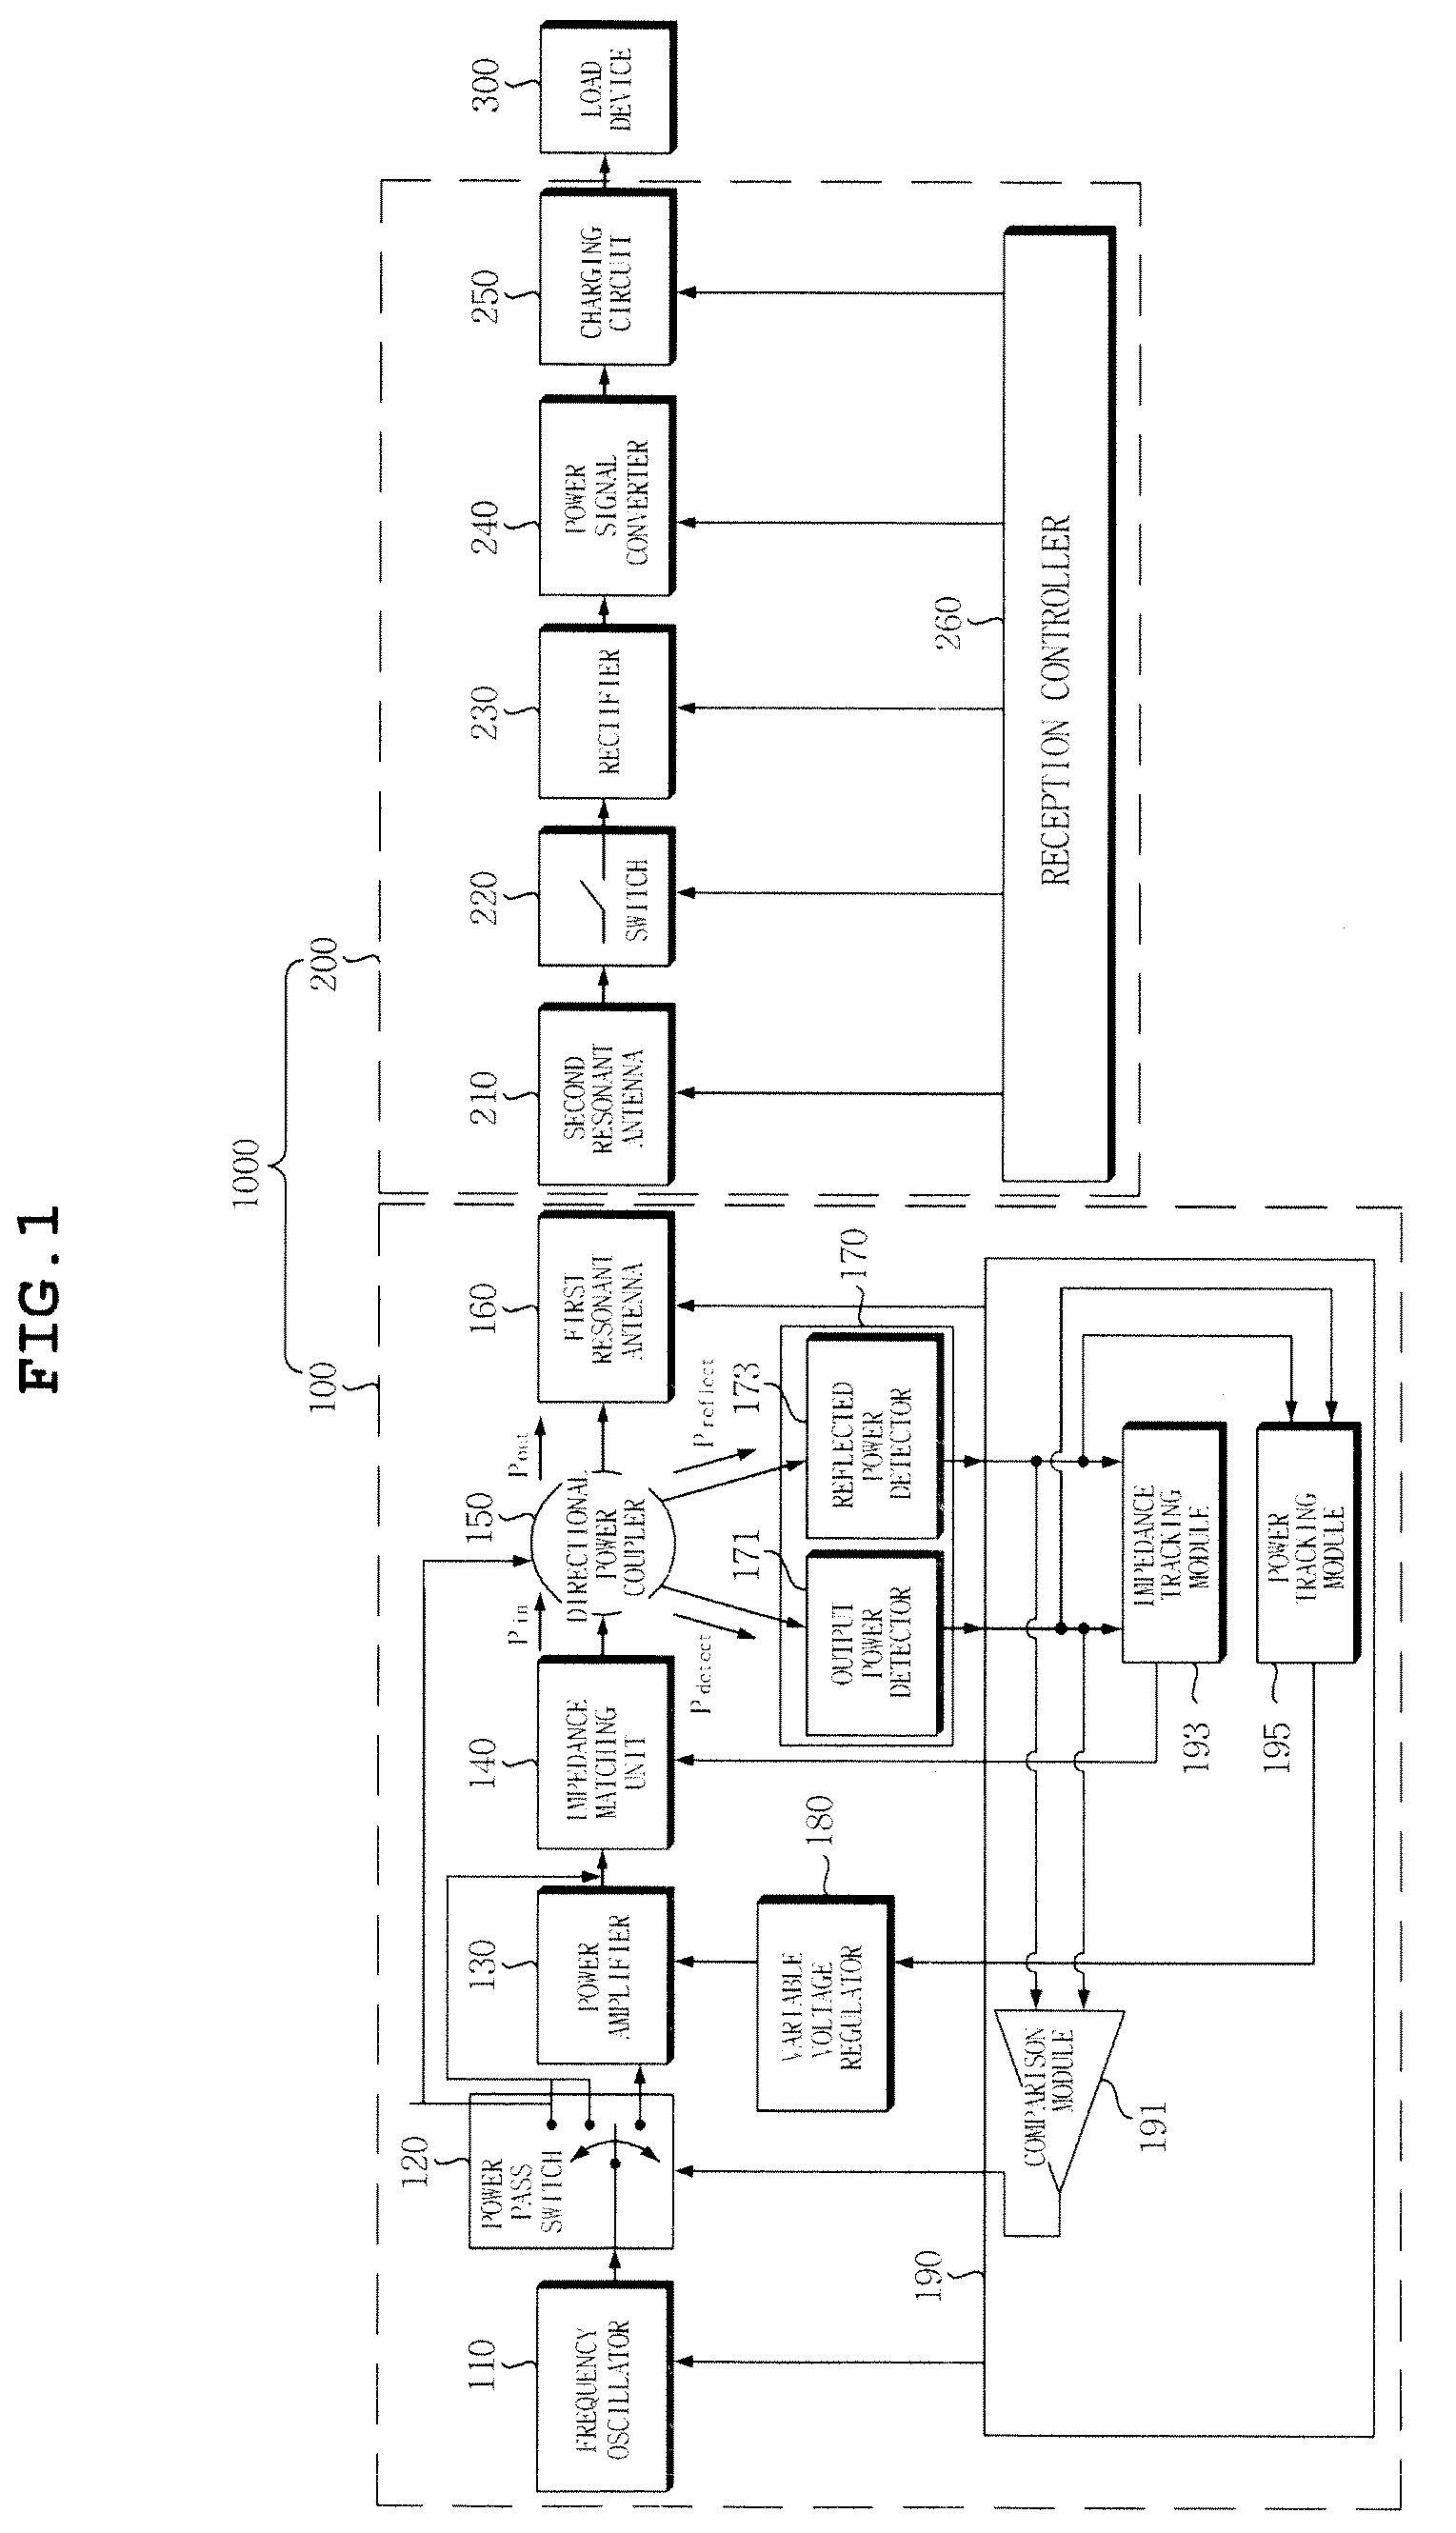 Wireless power transmission/reception apparatus and method